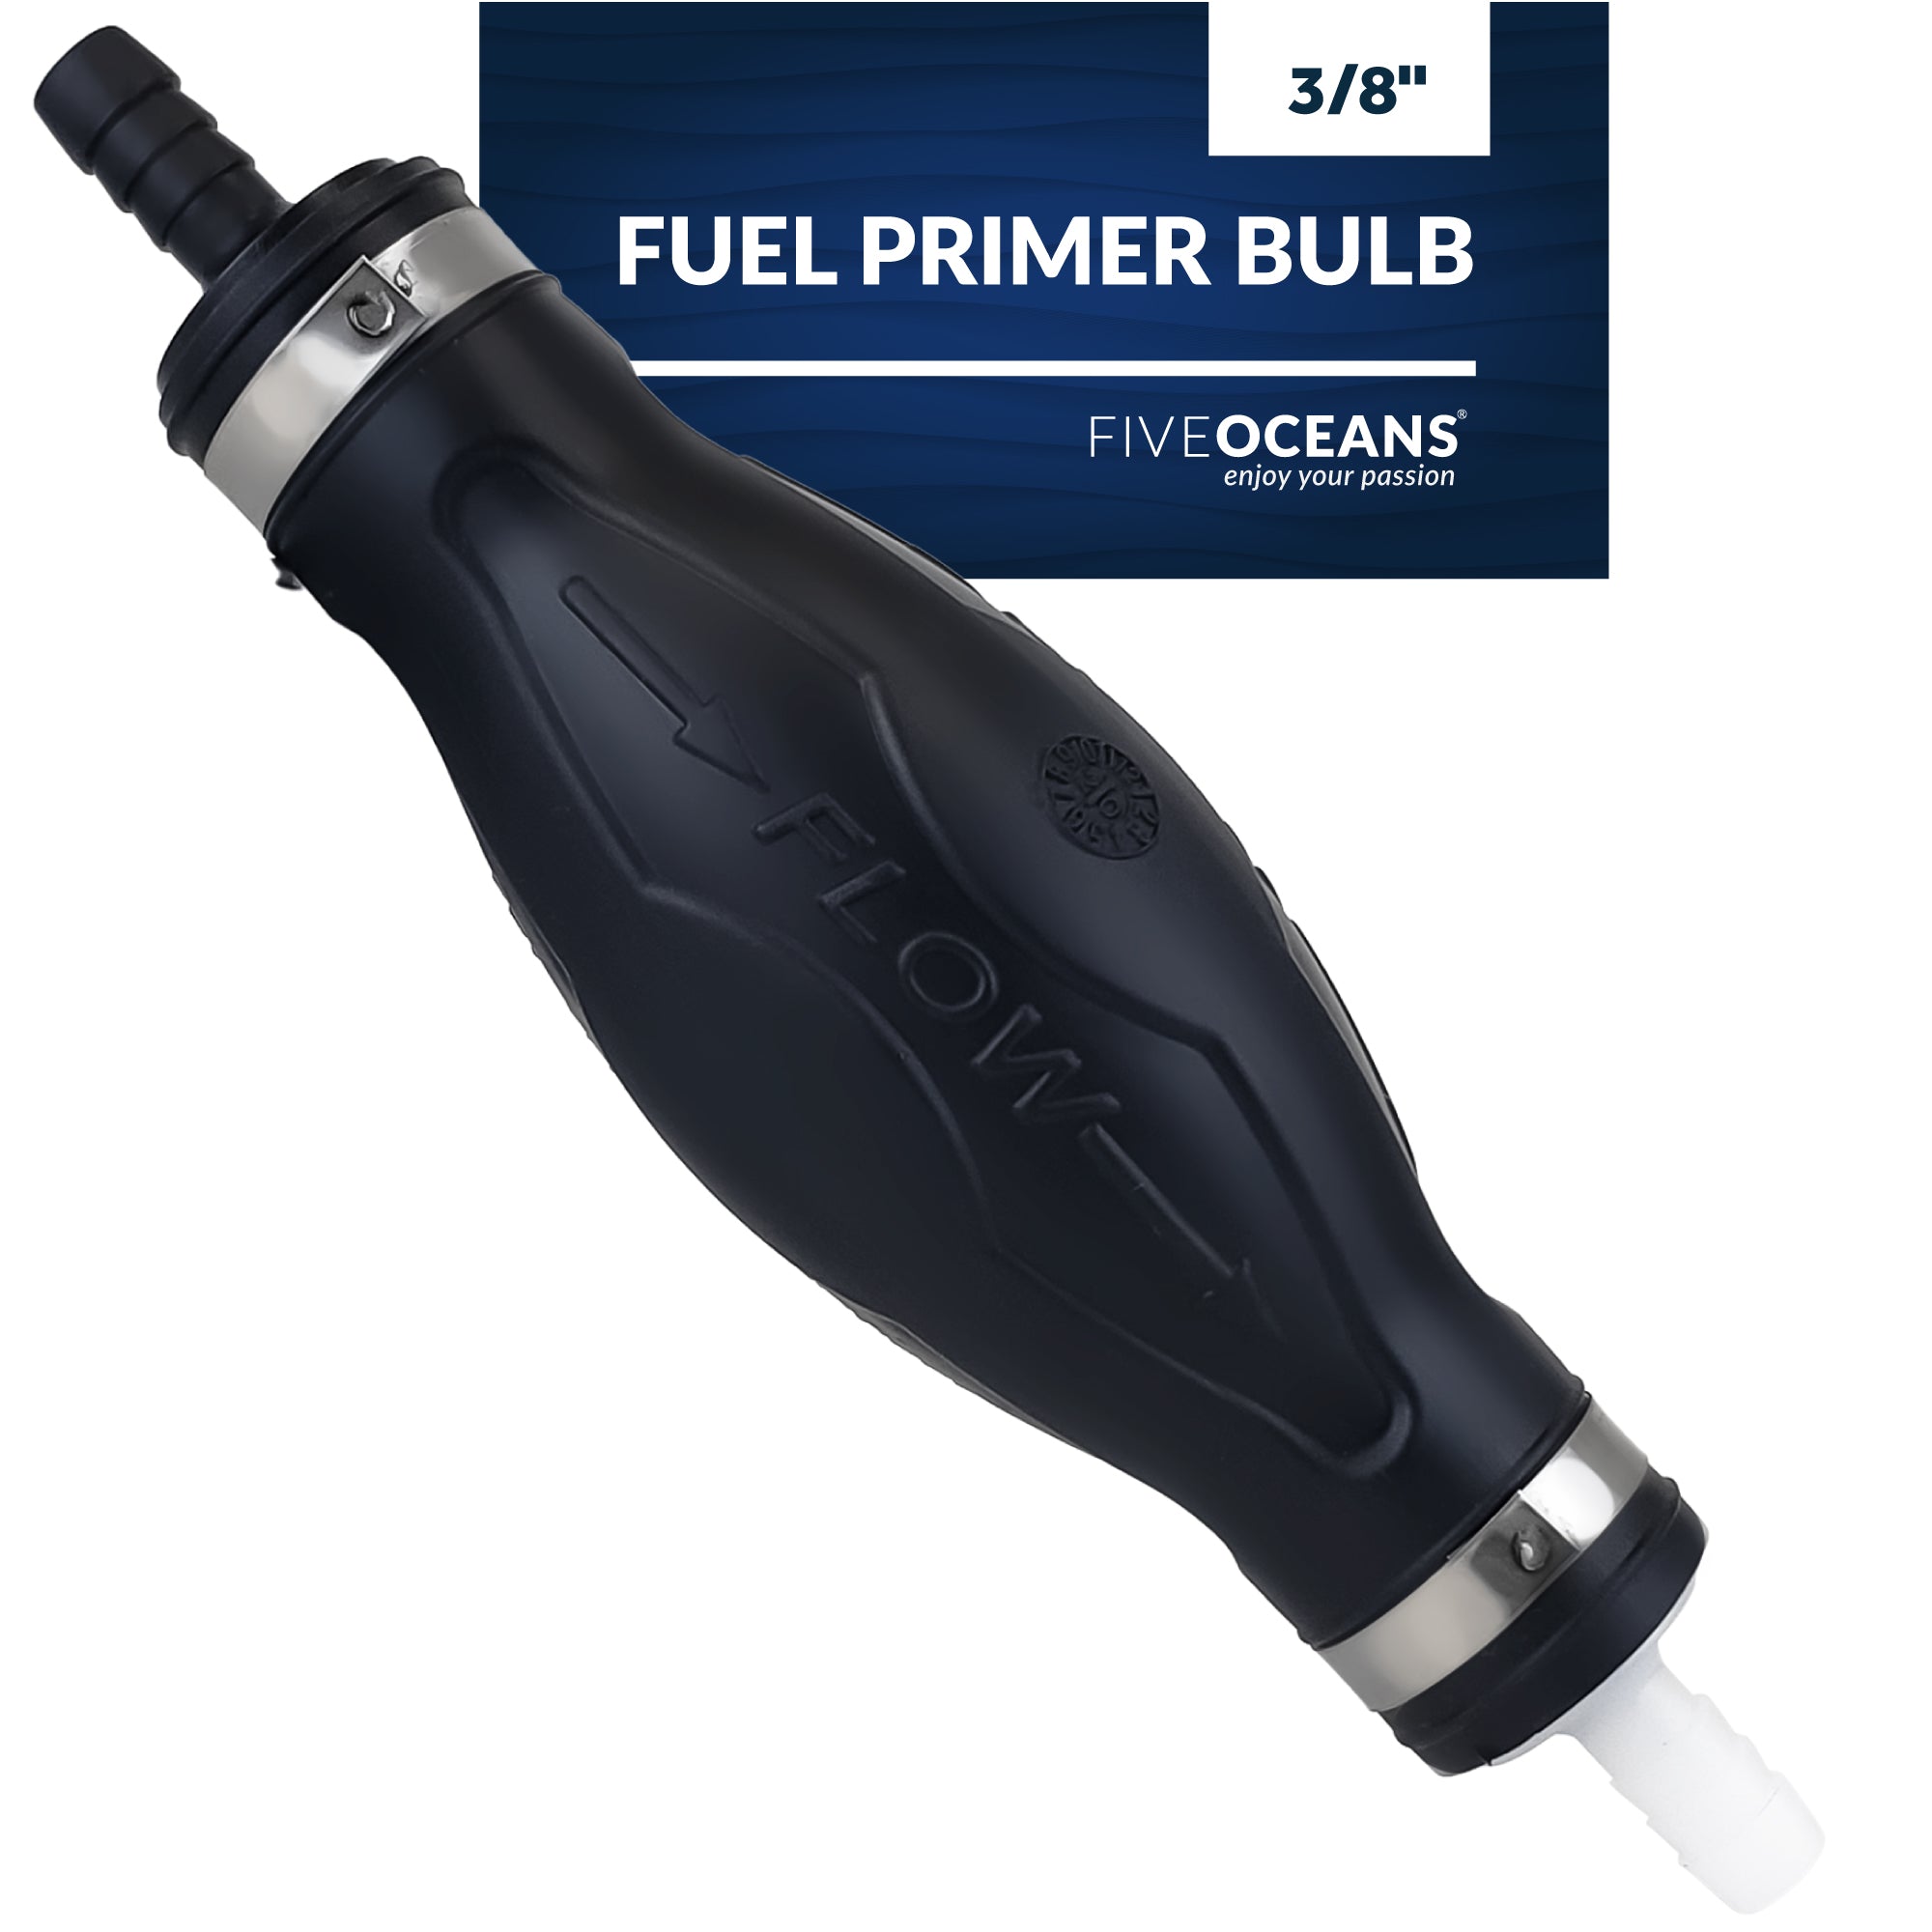 3/8-Inch Fuel Primer Bulb, Large EPA/CARB Approved - FO4279